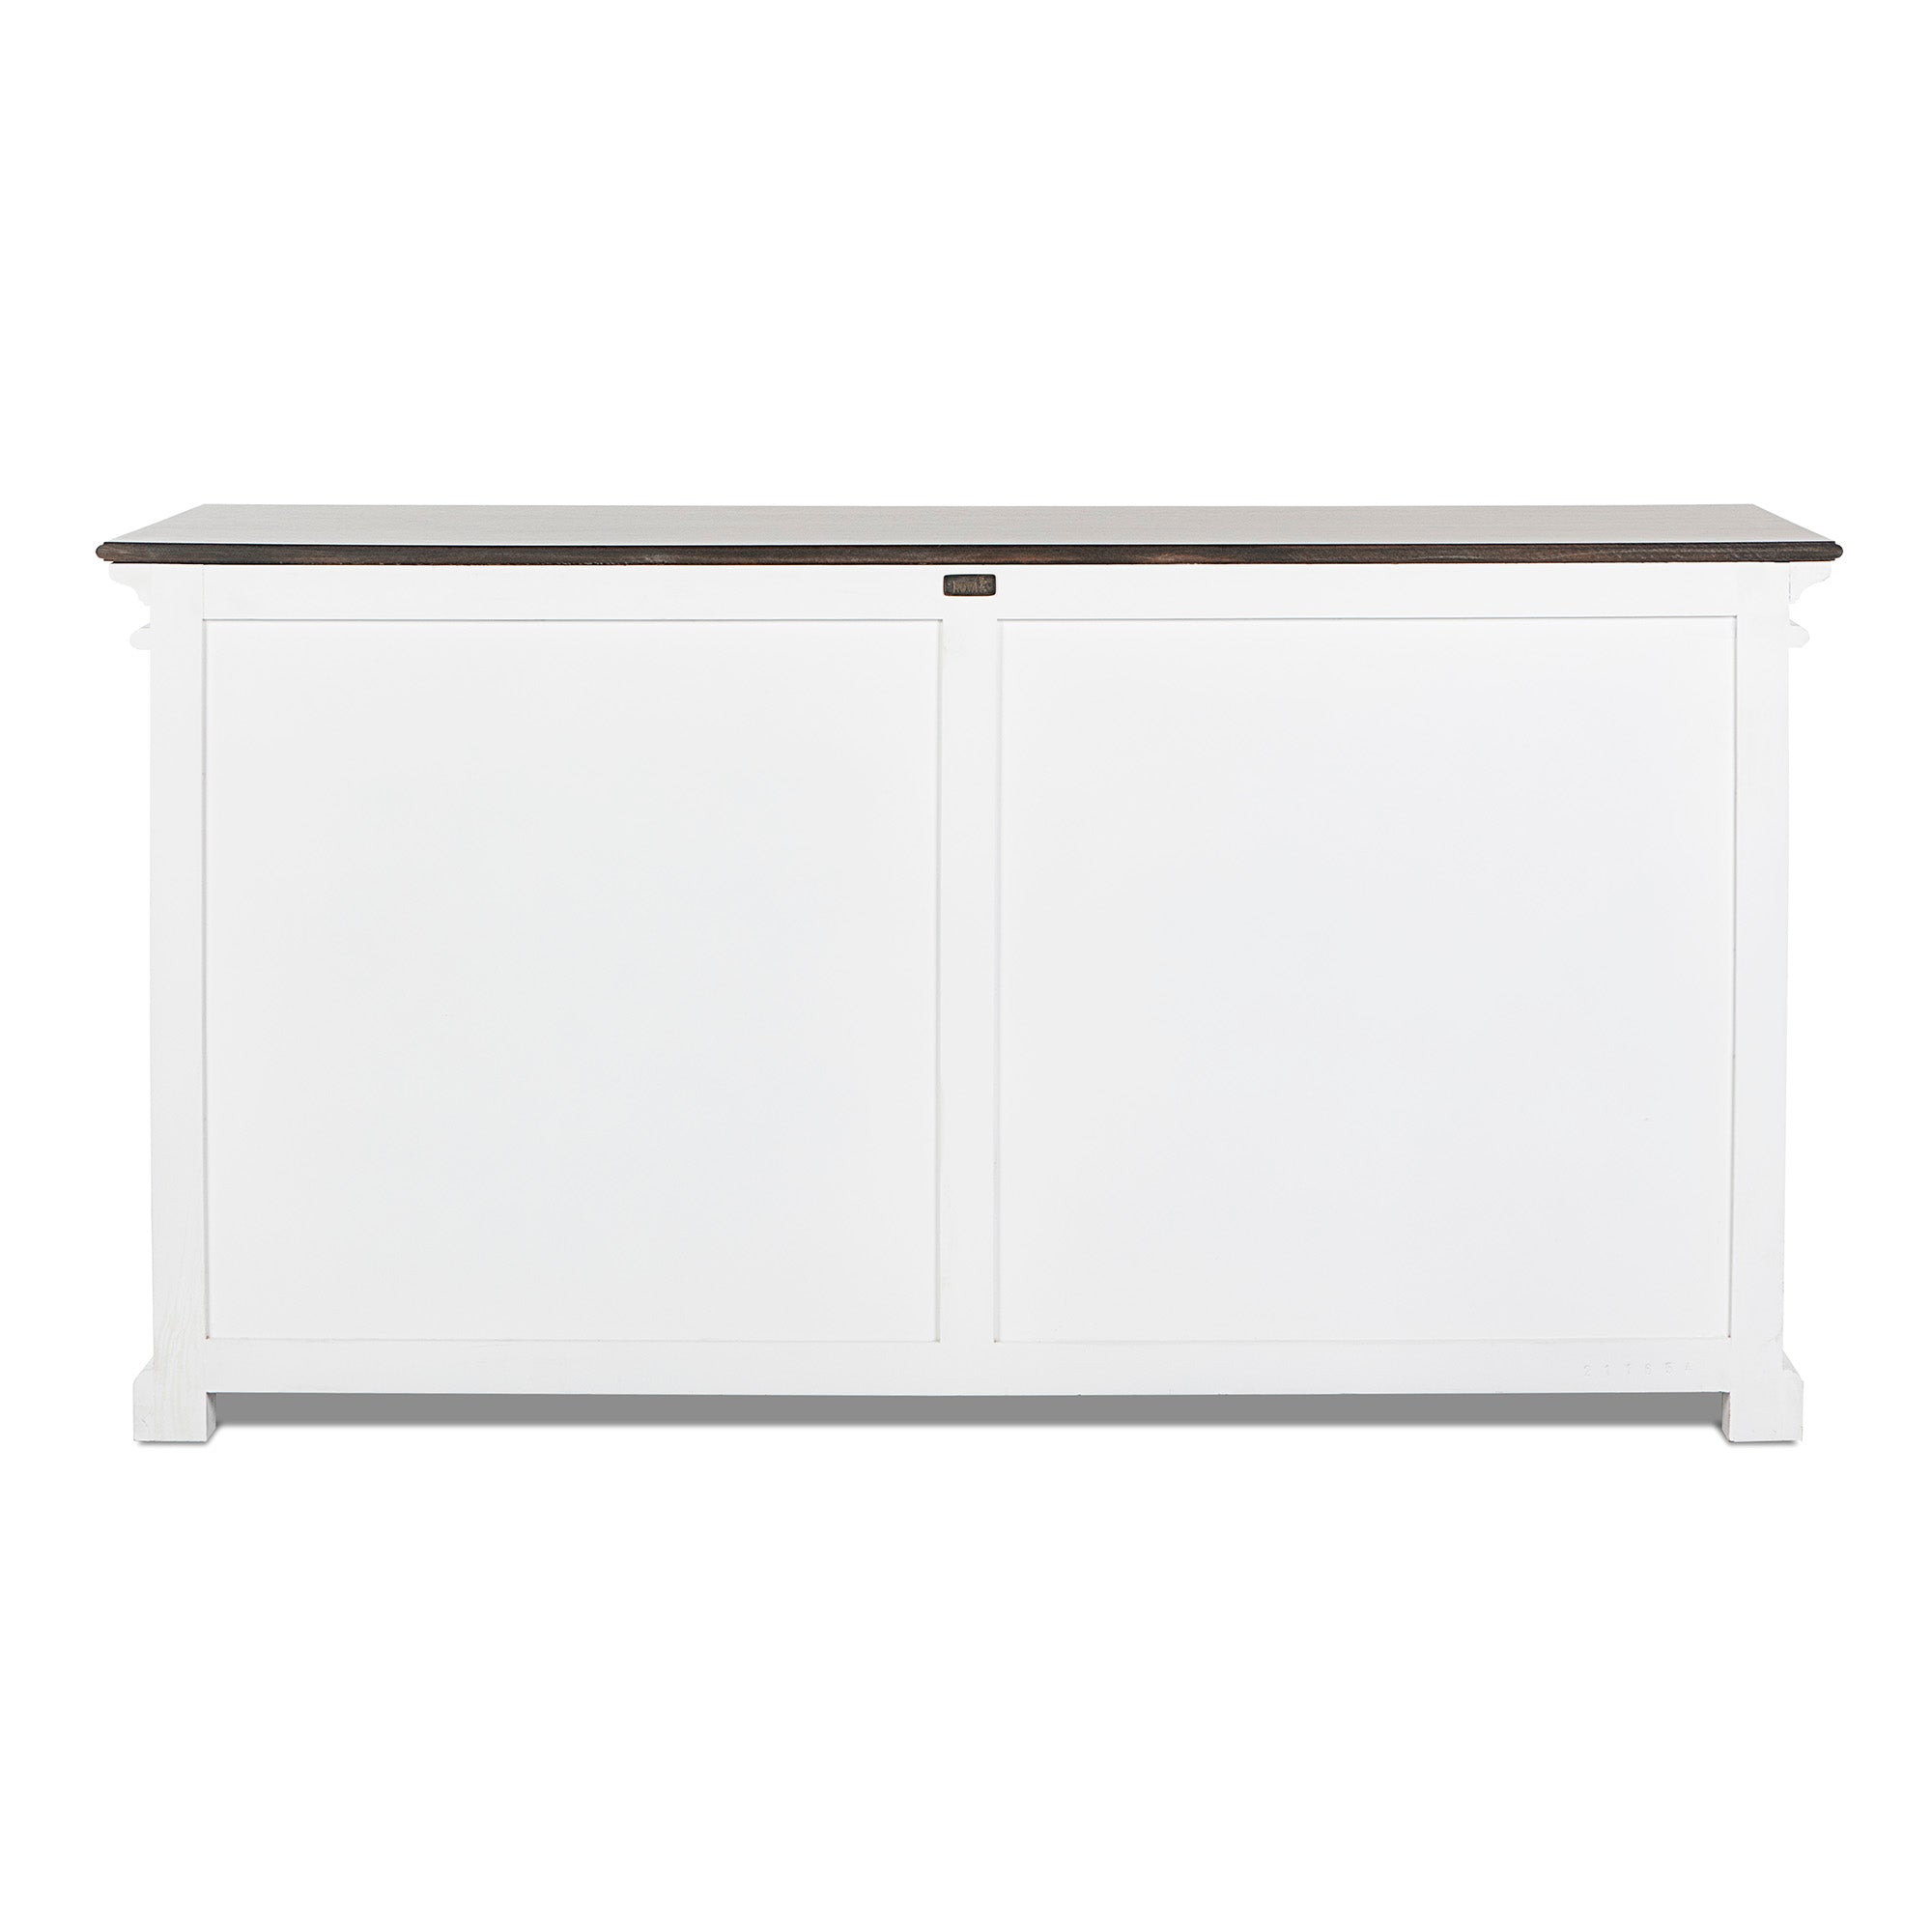 Halifax accent sideboard with 4 glass doors